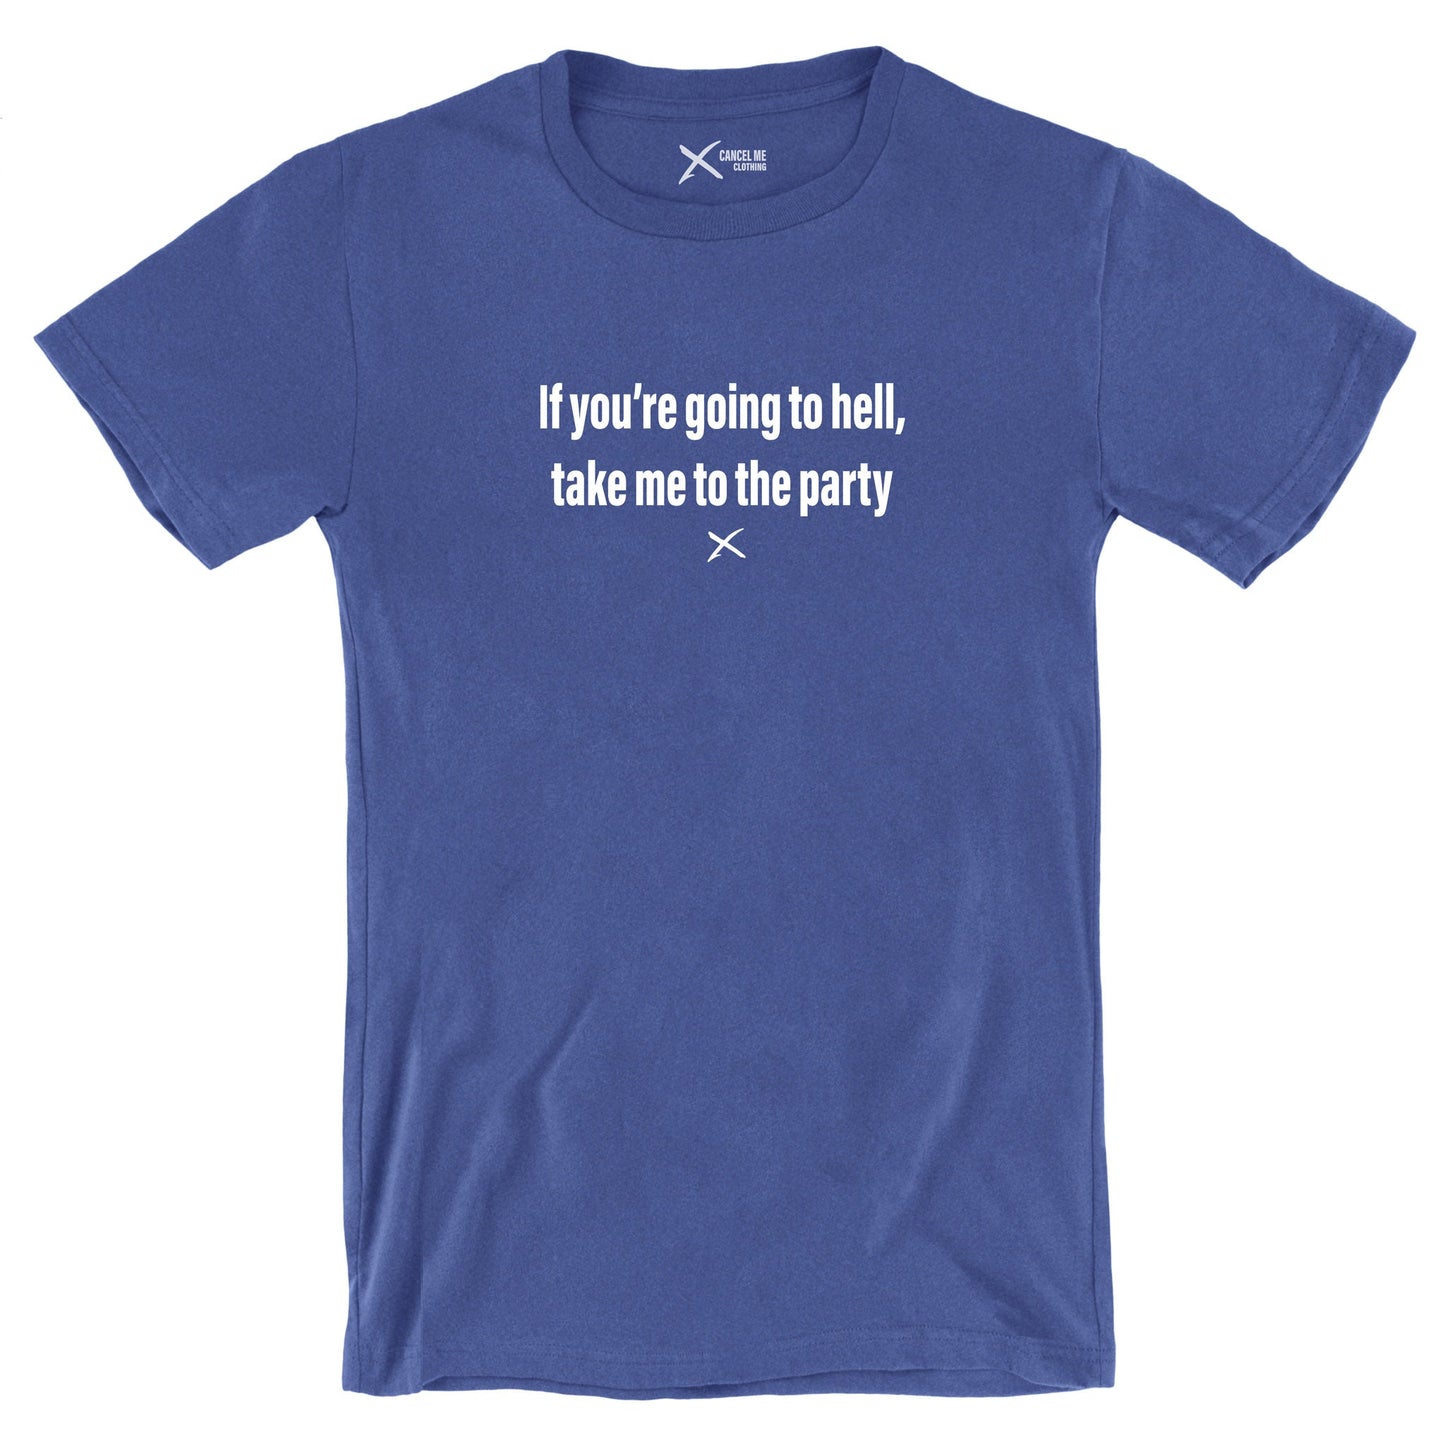 If you're going to hell, take me to the party - Shirt